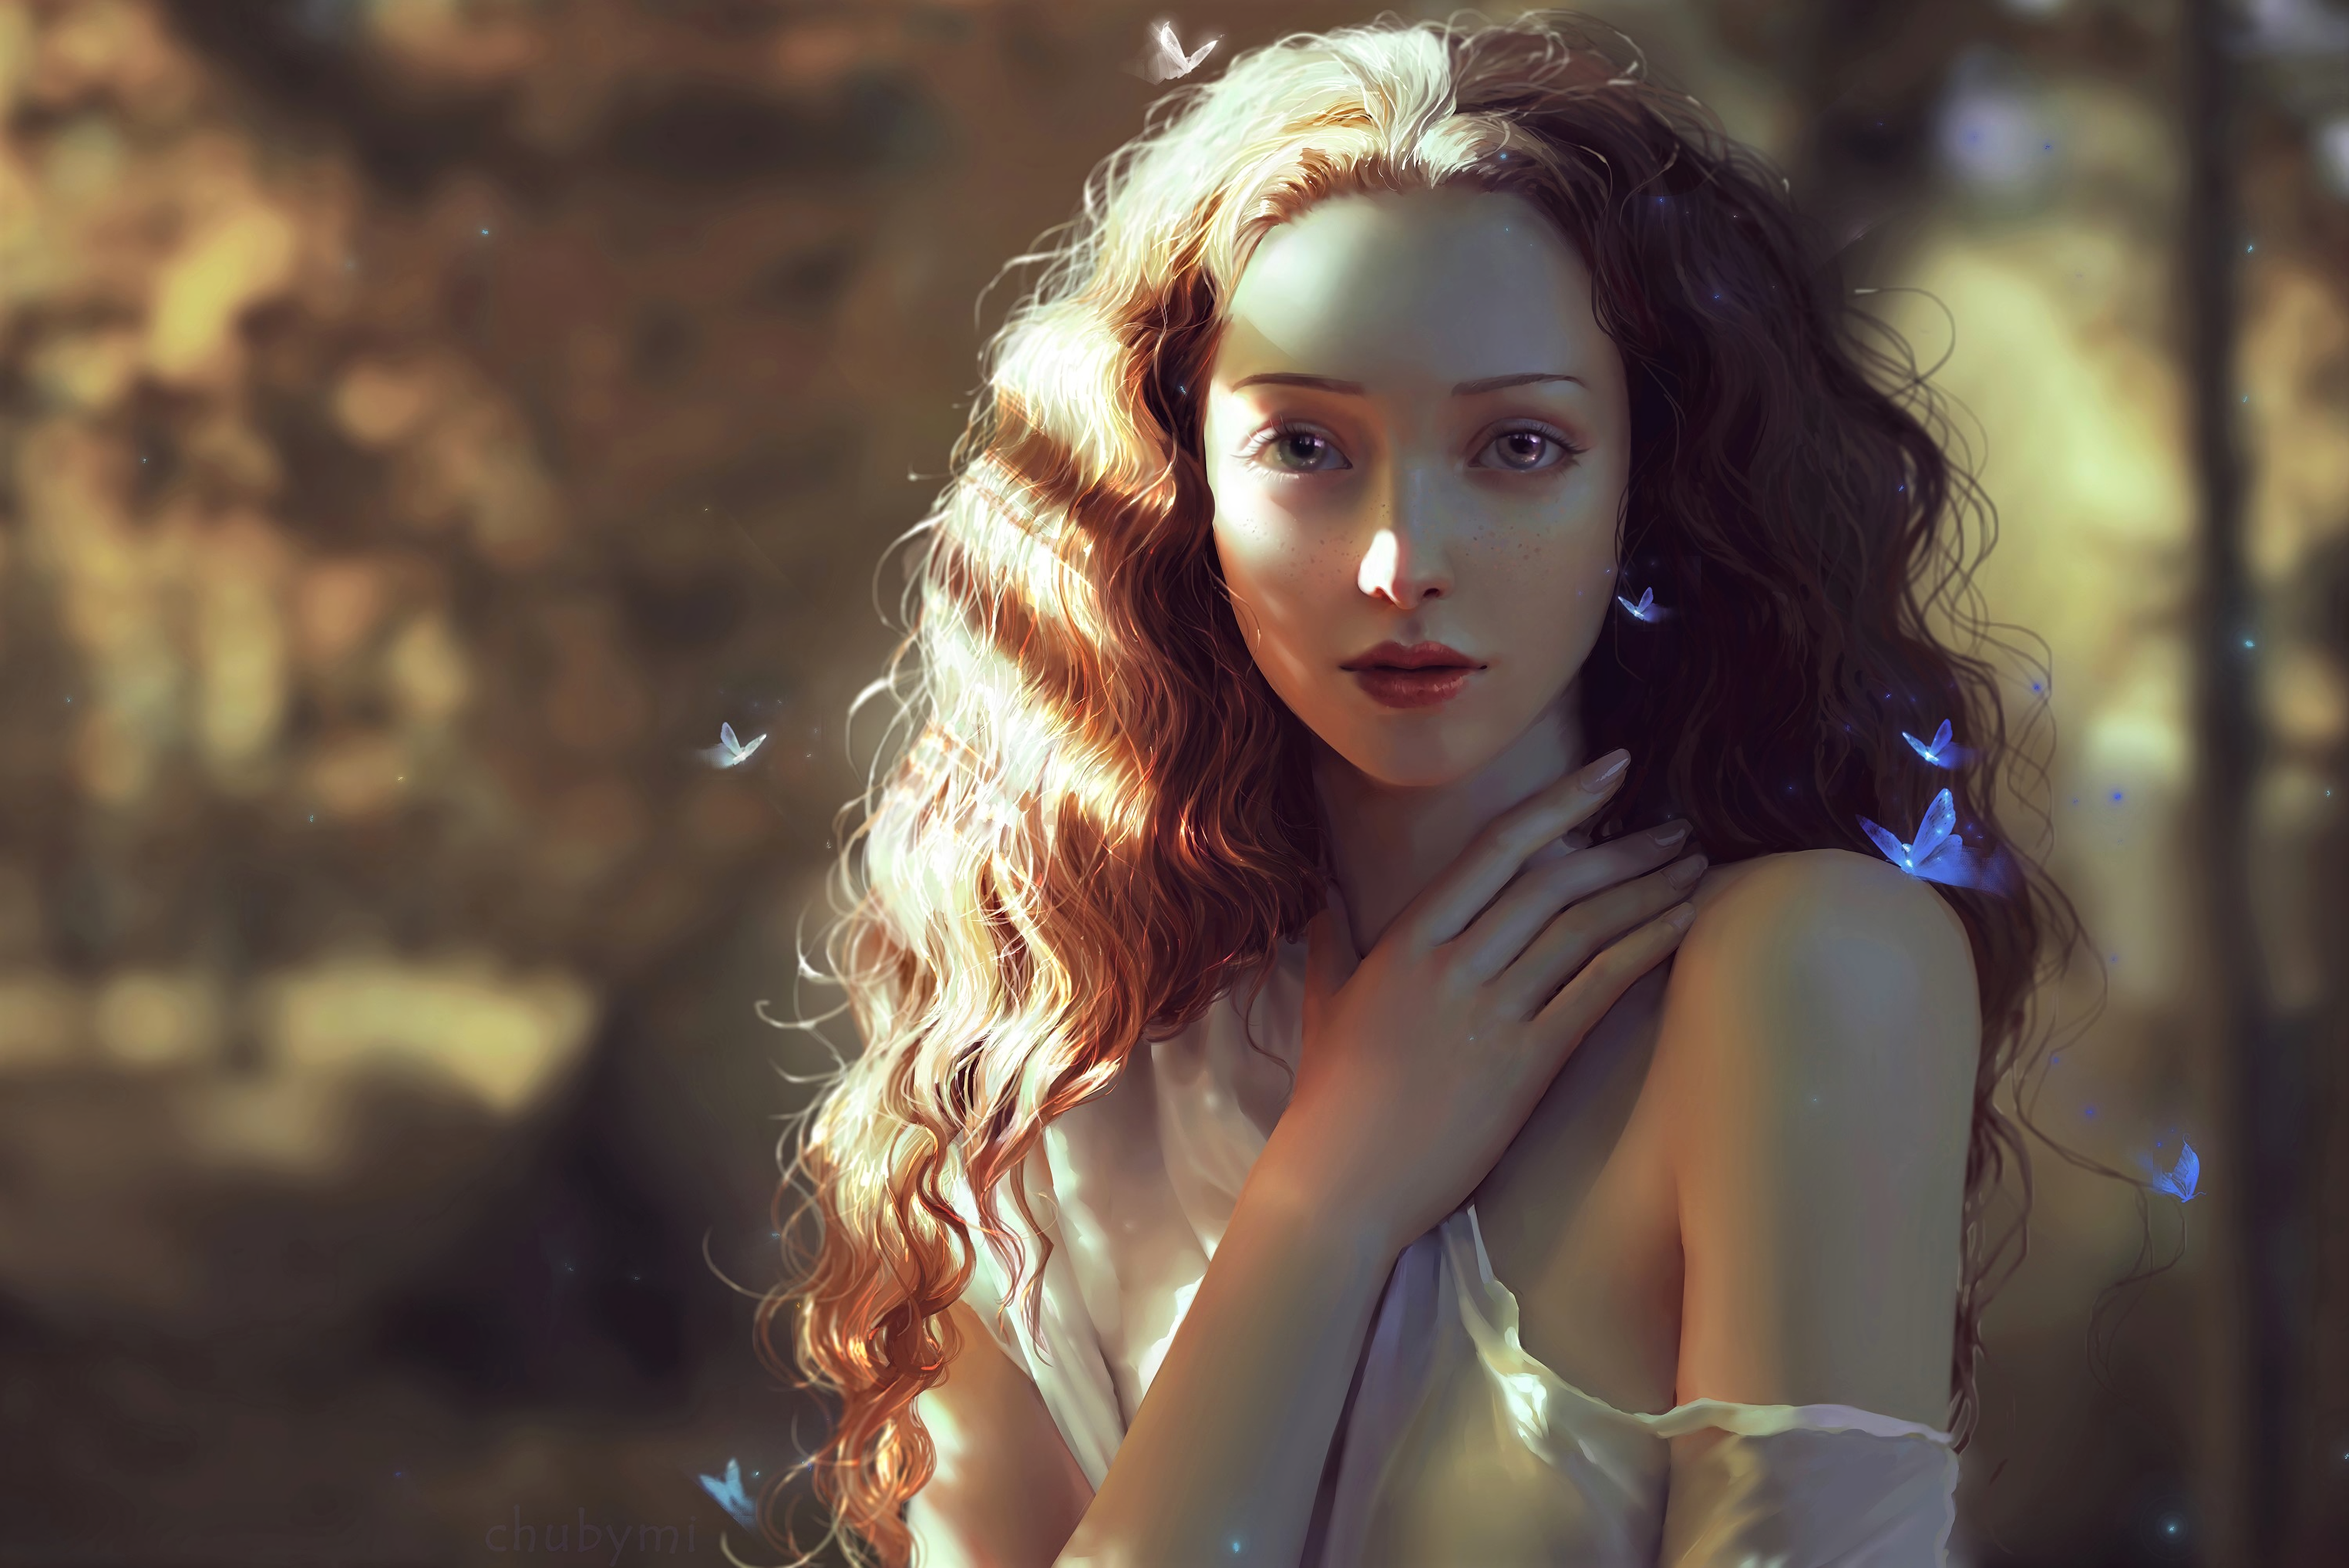 Artistic Butterfly Fantasy Girl Long Hair Painting Woman 4000x2670